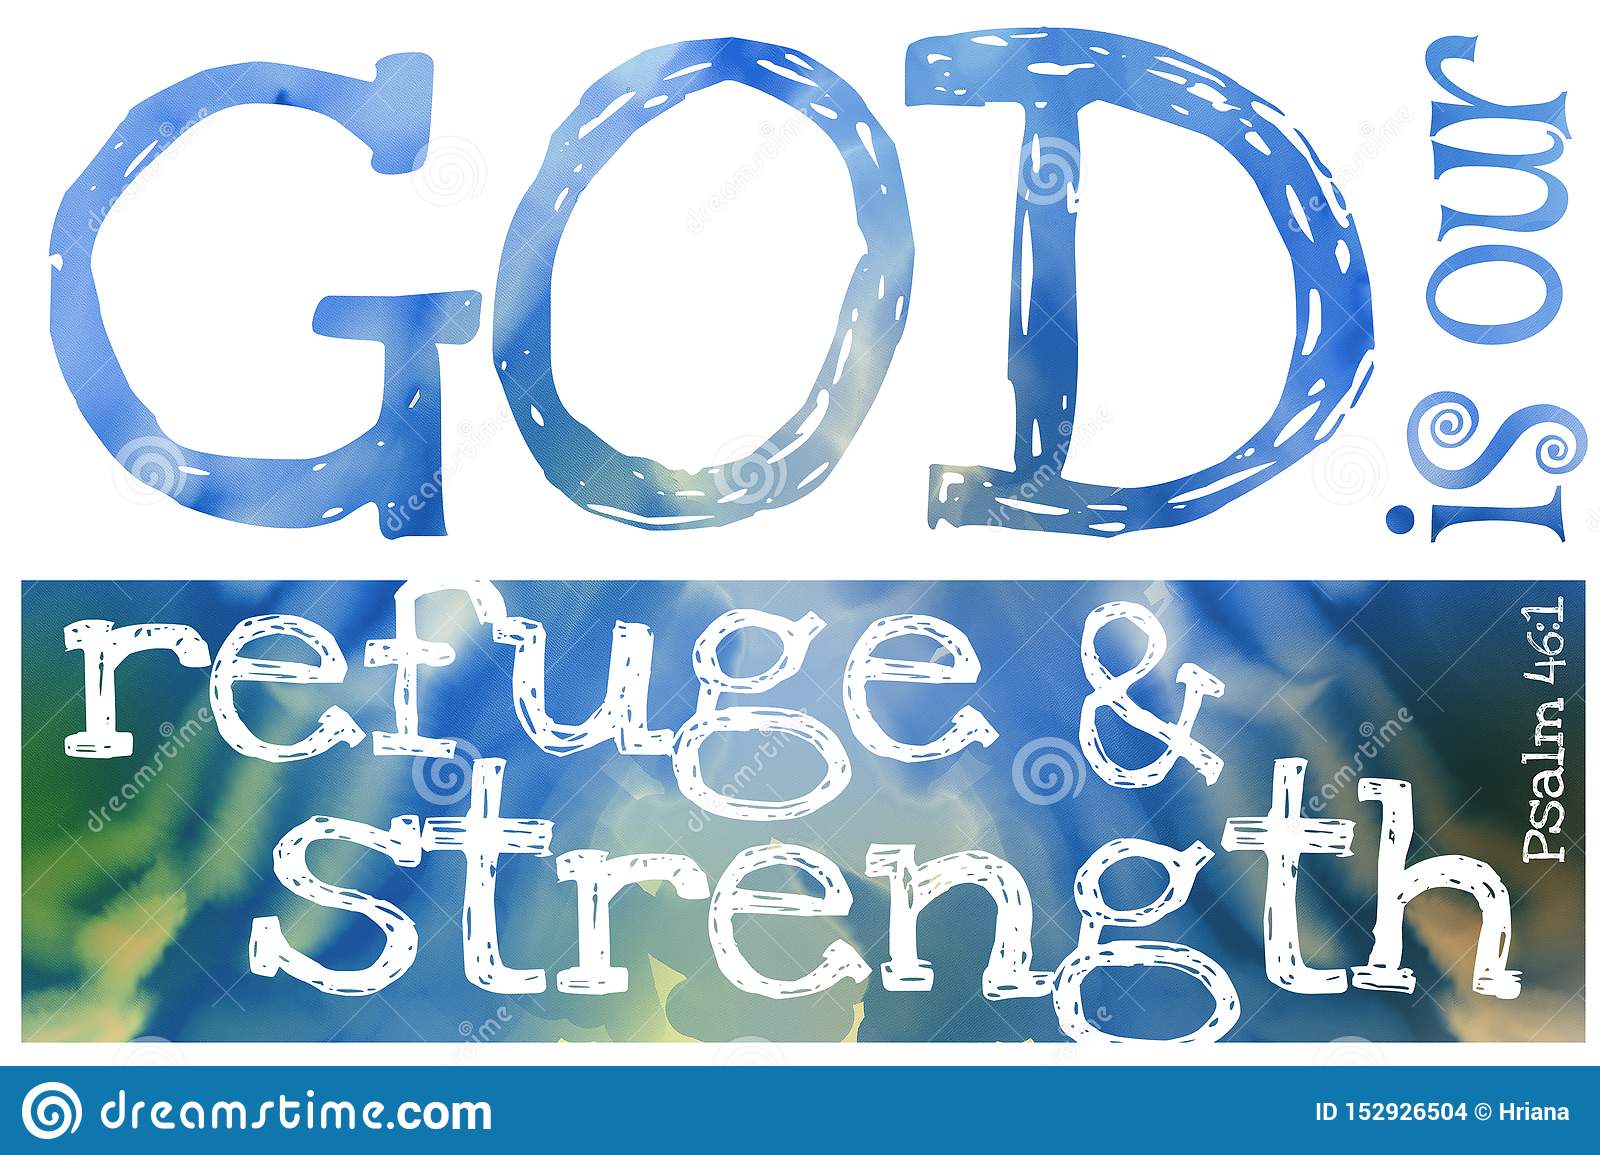 god-our-refuge-strength-psalm-horizontal-poster-inspirational-bible-quotes-verse-text-watercolor-letters-quotation-152926504.jpg